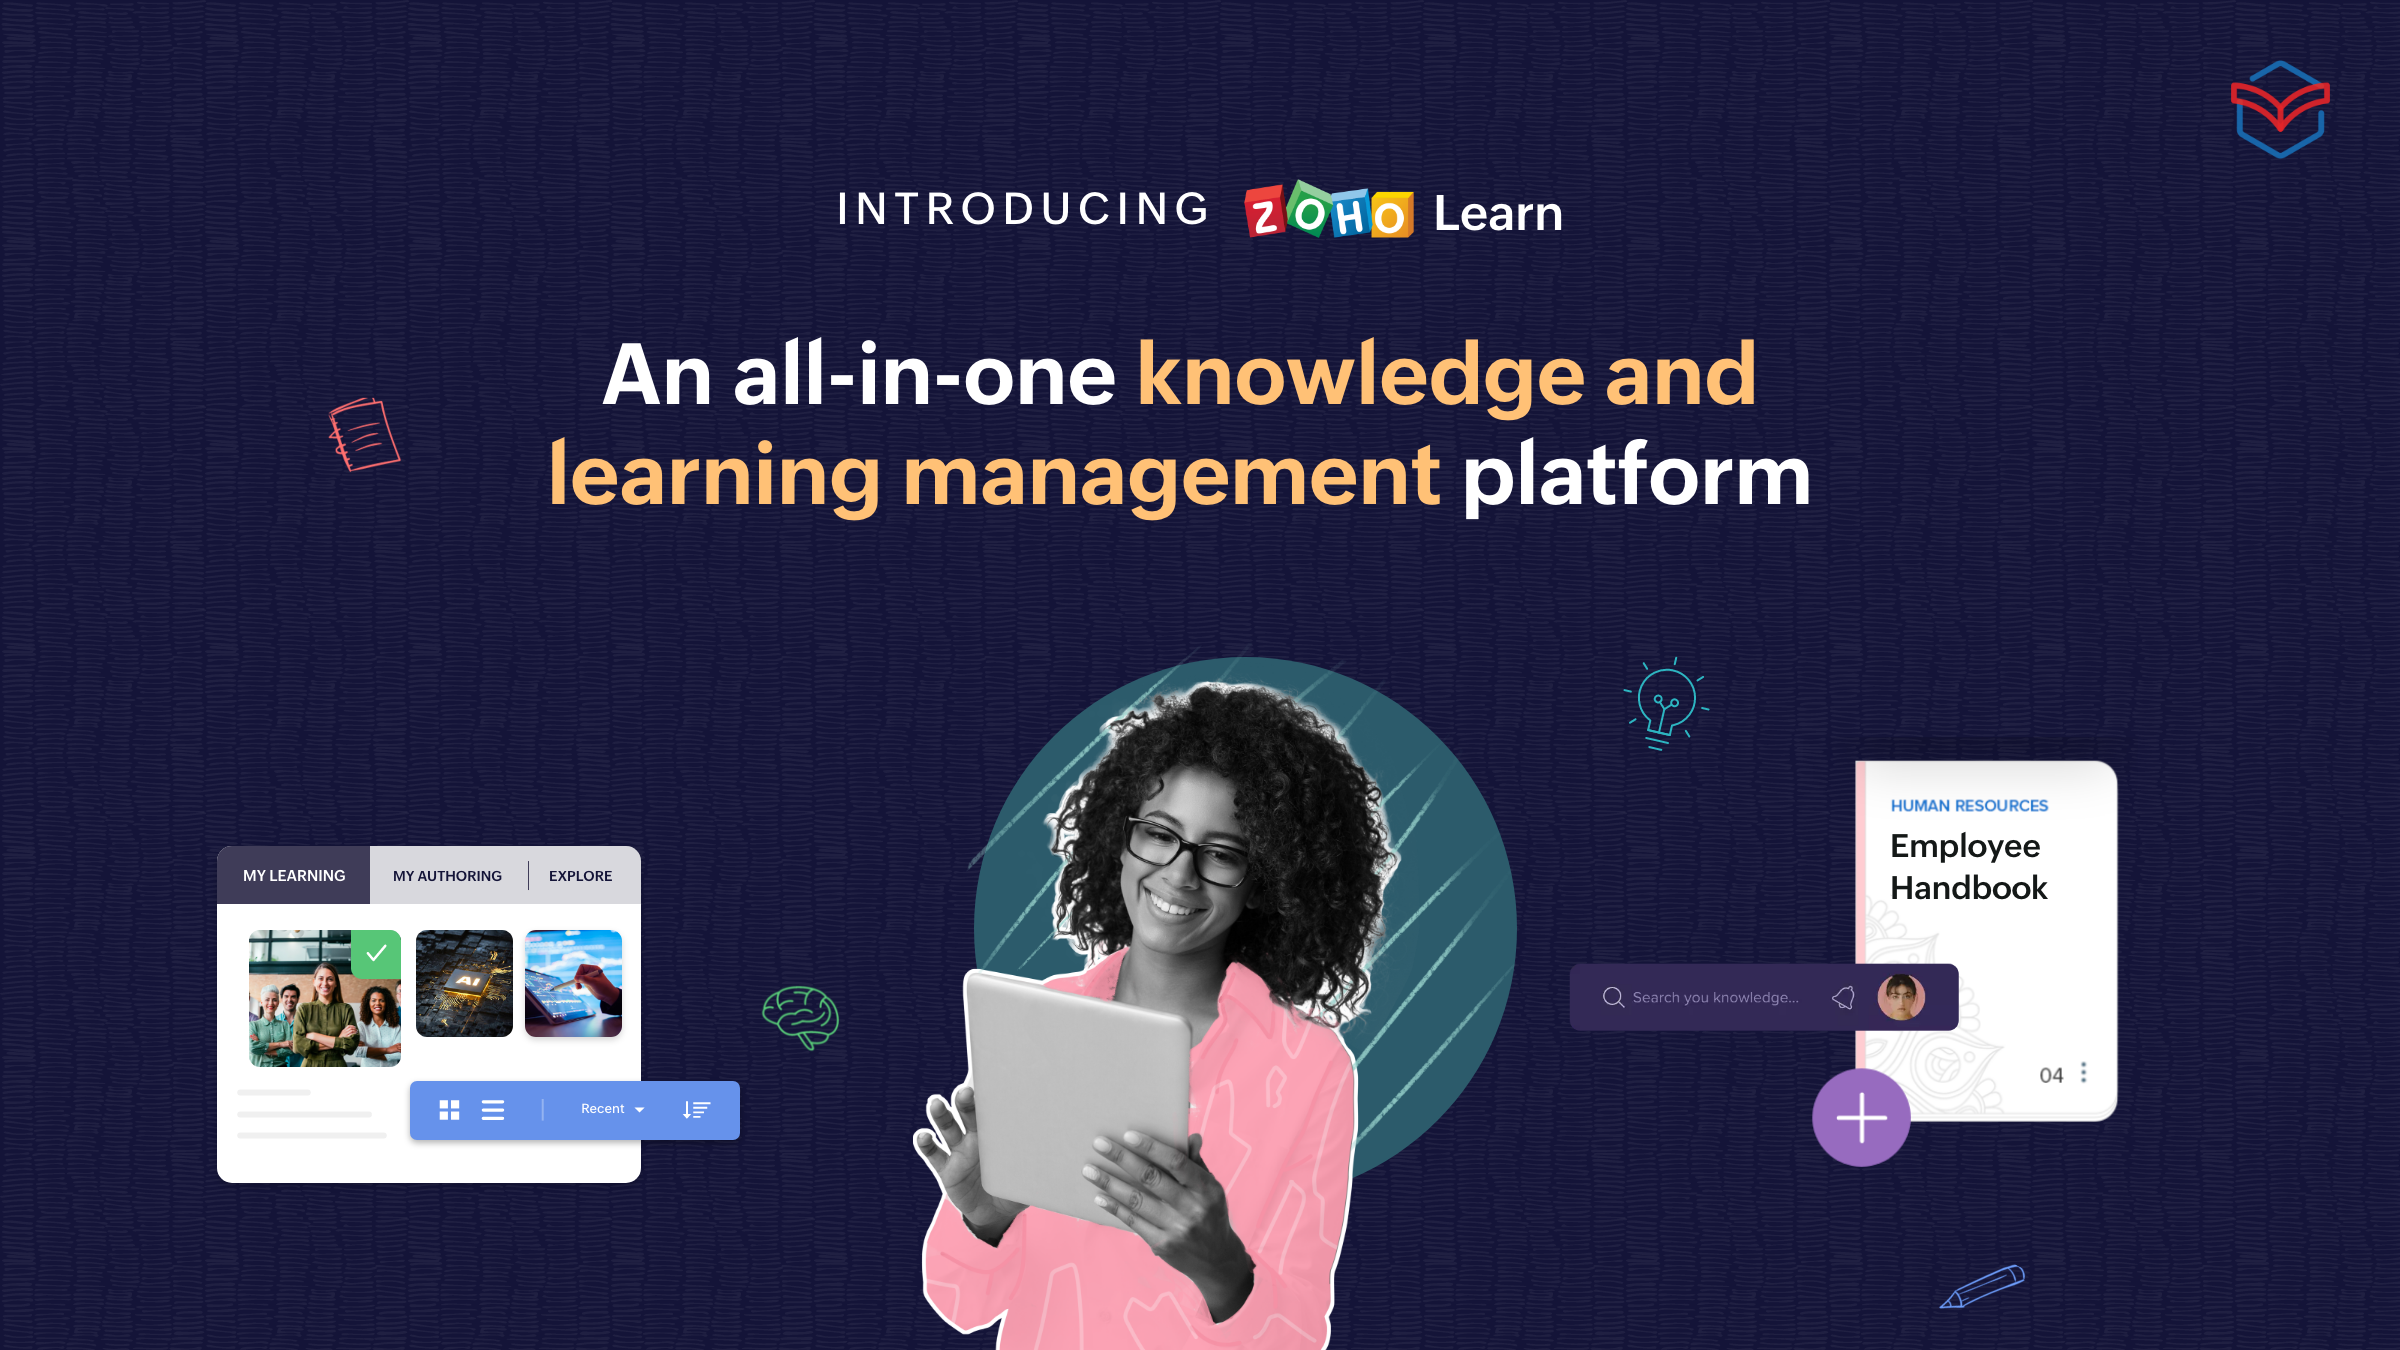 Introducing Zoho Learn: Your comprehensive knowledge and learning management platform